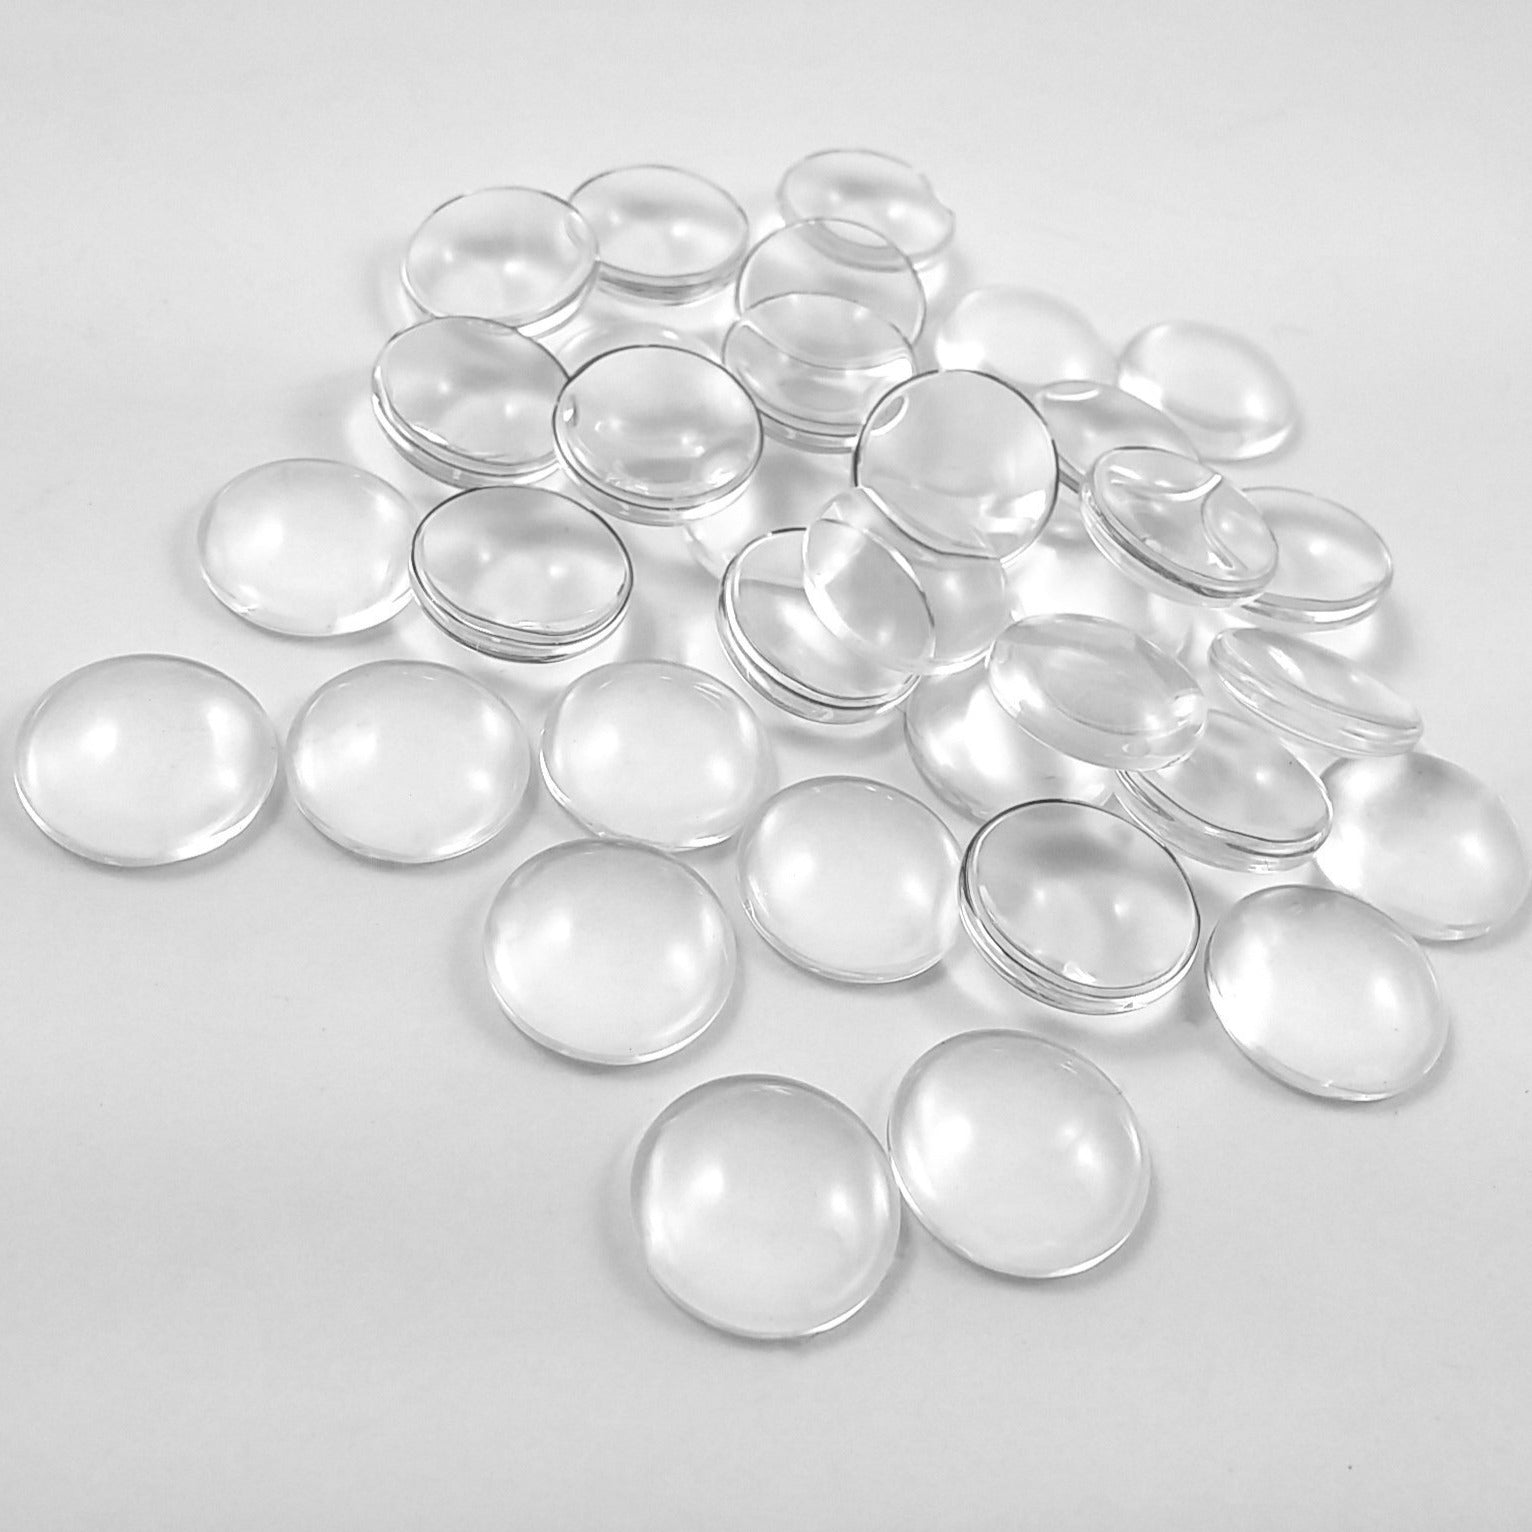 Cabochon, glass, transparent clear, 40x30mm calibrated faceted